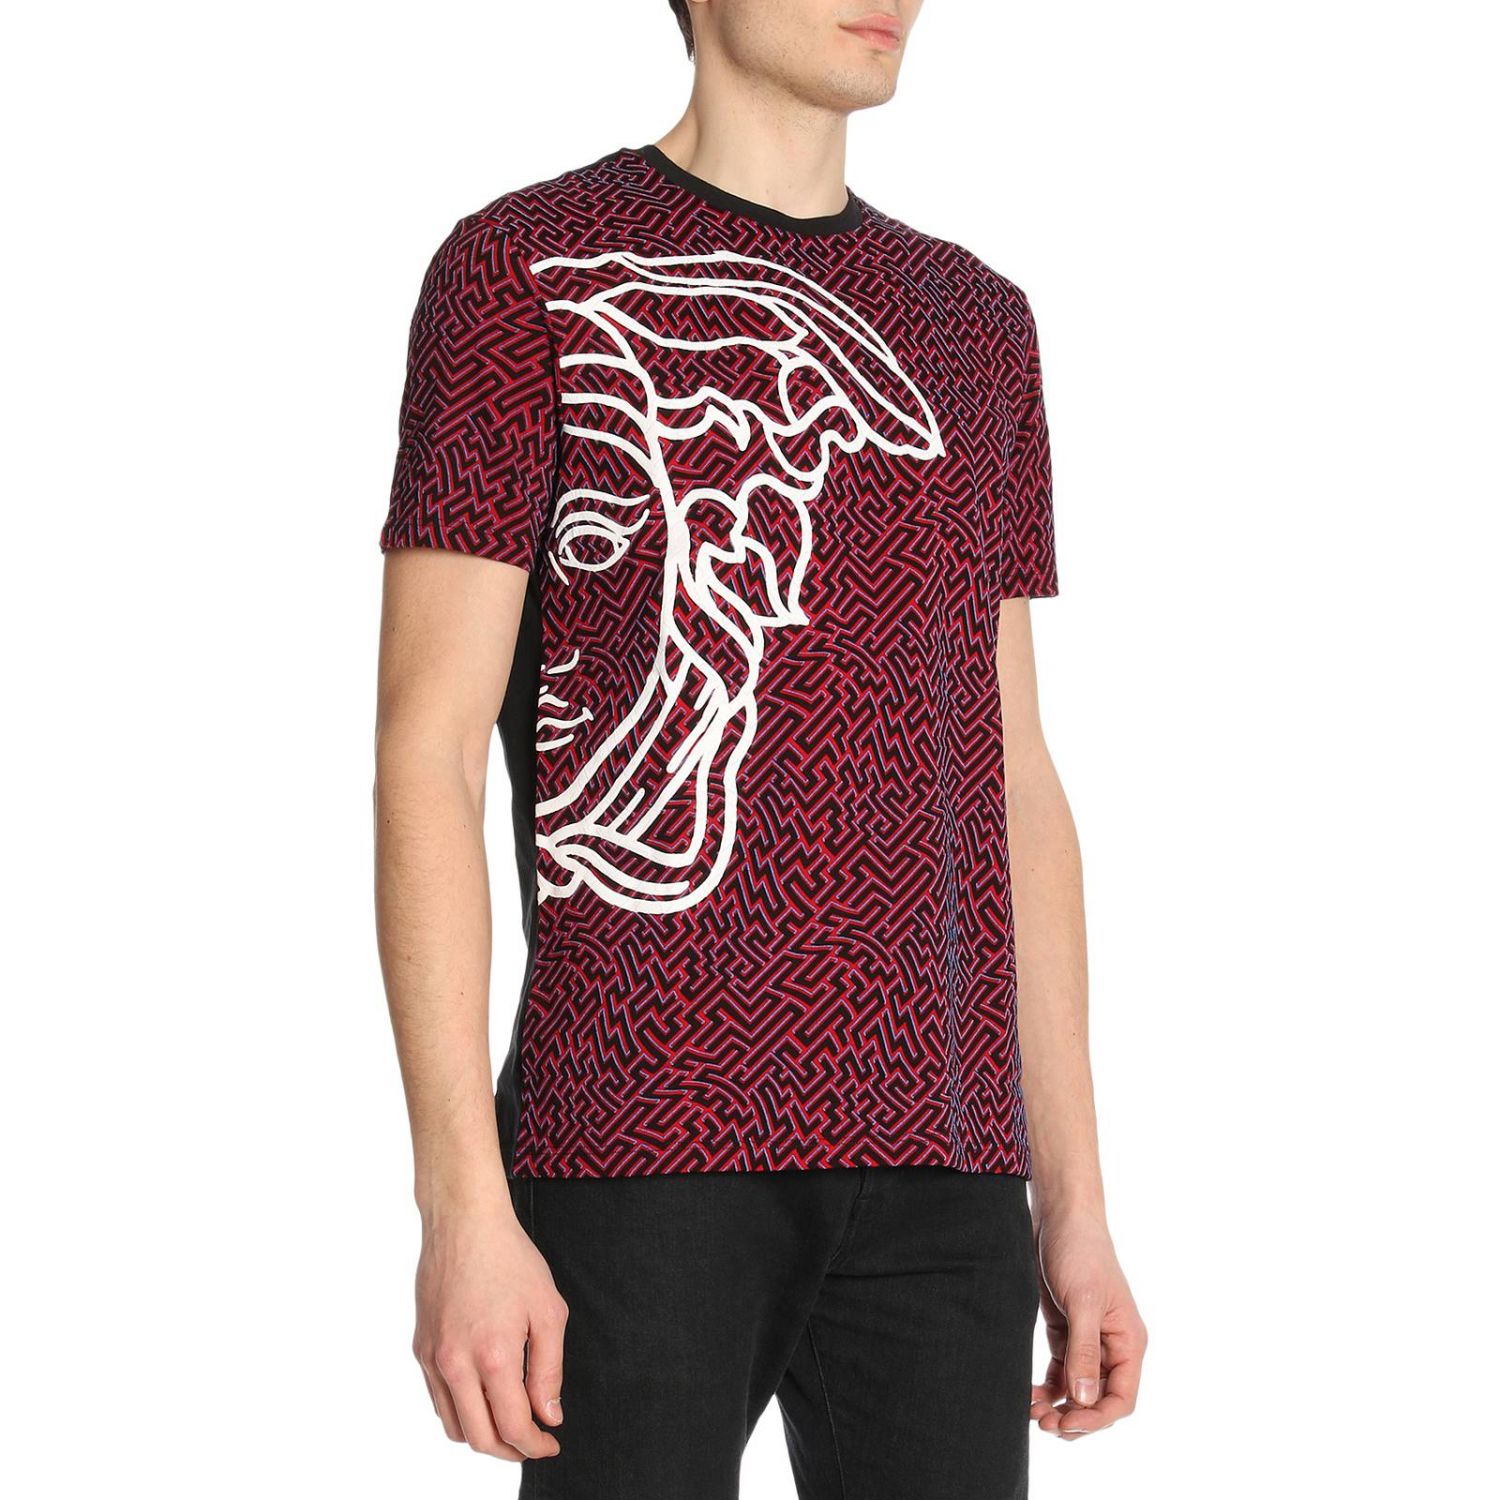 versace collection red t shirt